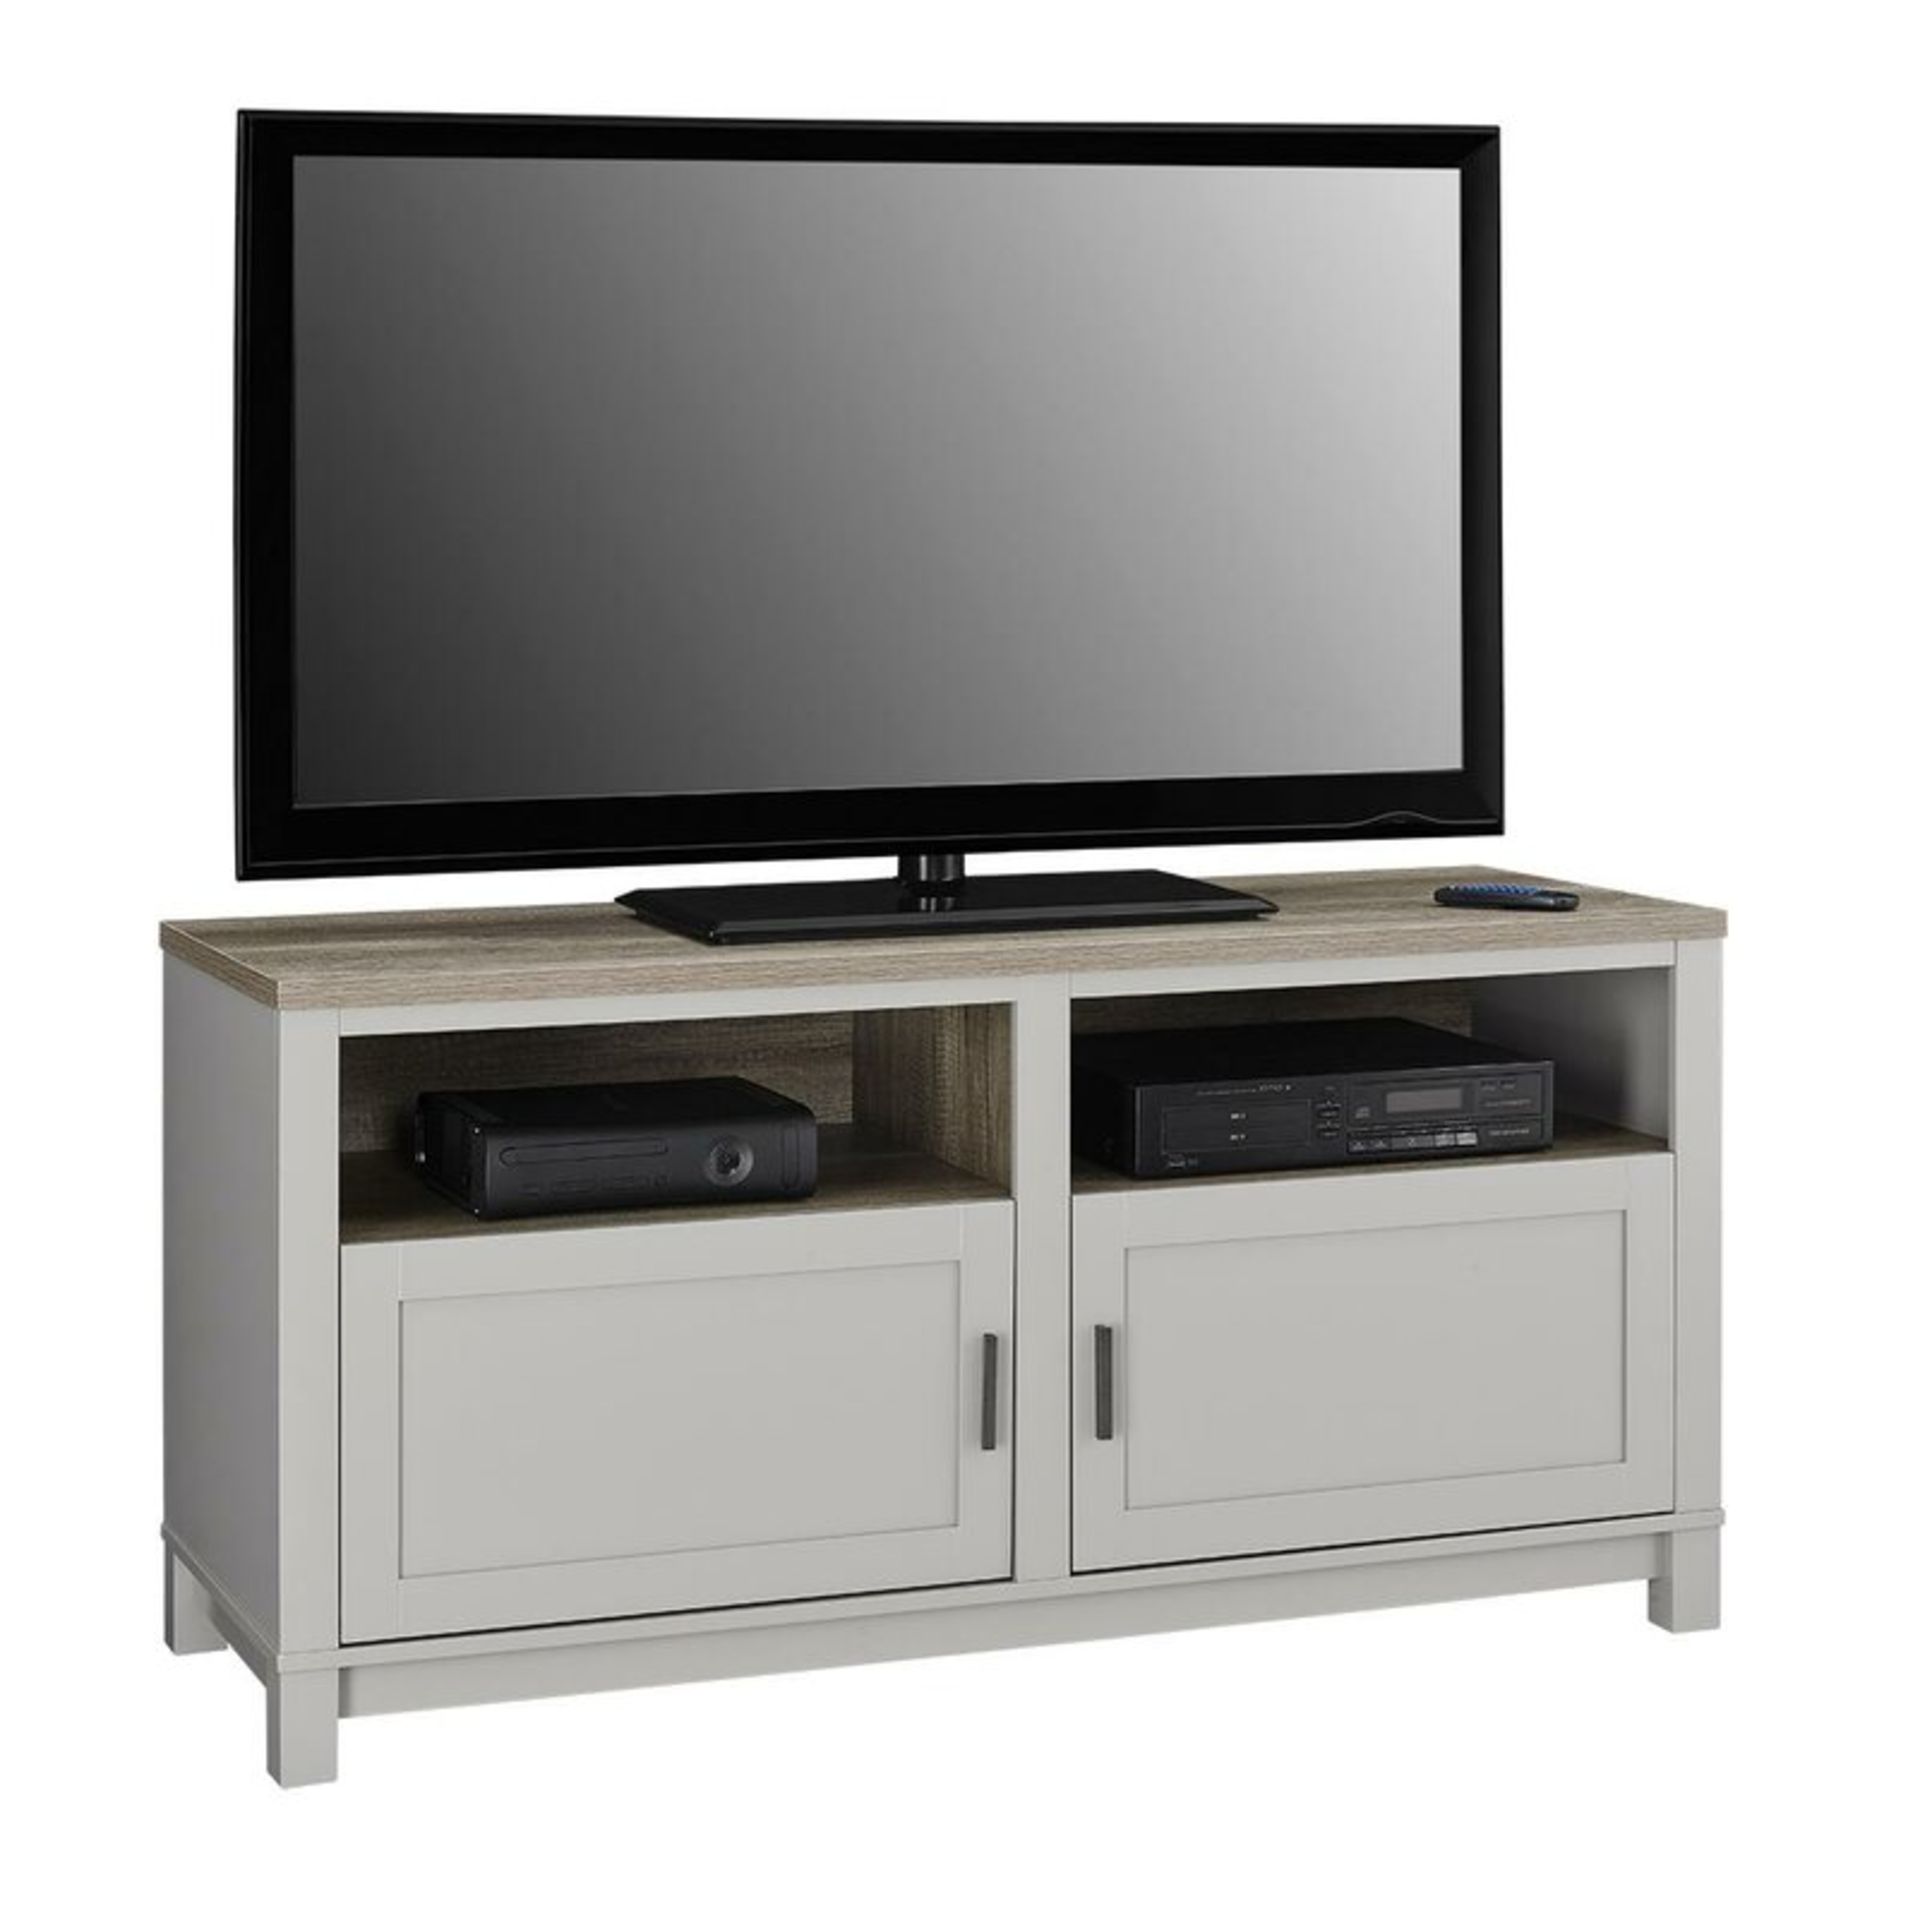 PALMERSTON TV STAND FOR TVs UP, COLOUR: GREY. SIZE W 136.40 x D 50.30 x H 68CM RRP £209.99